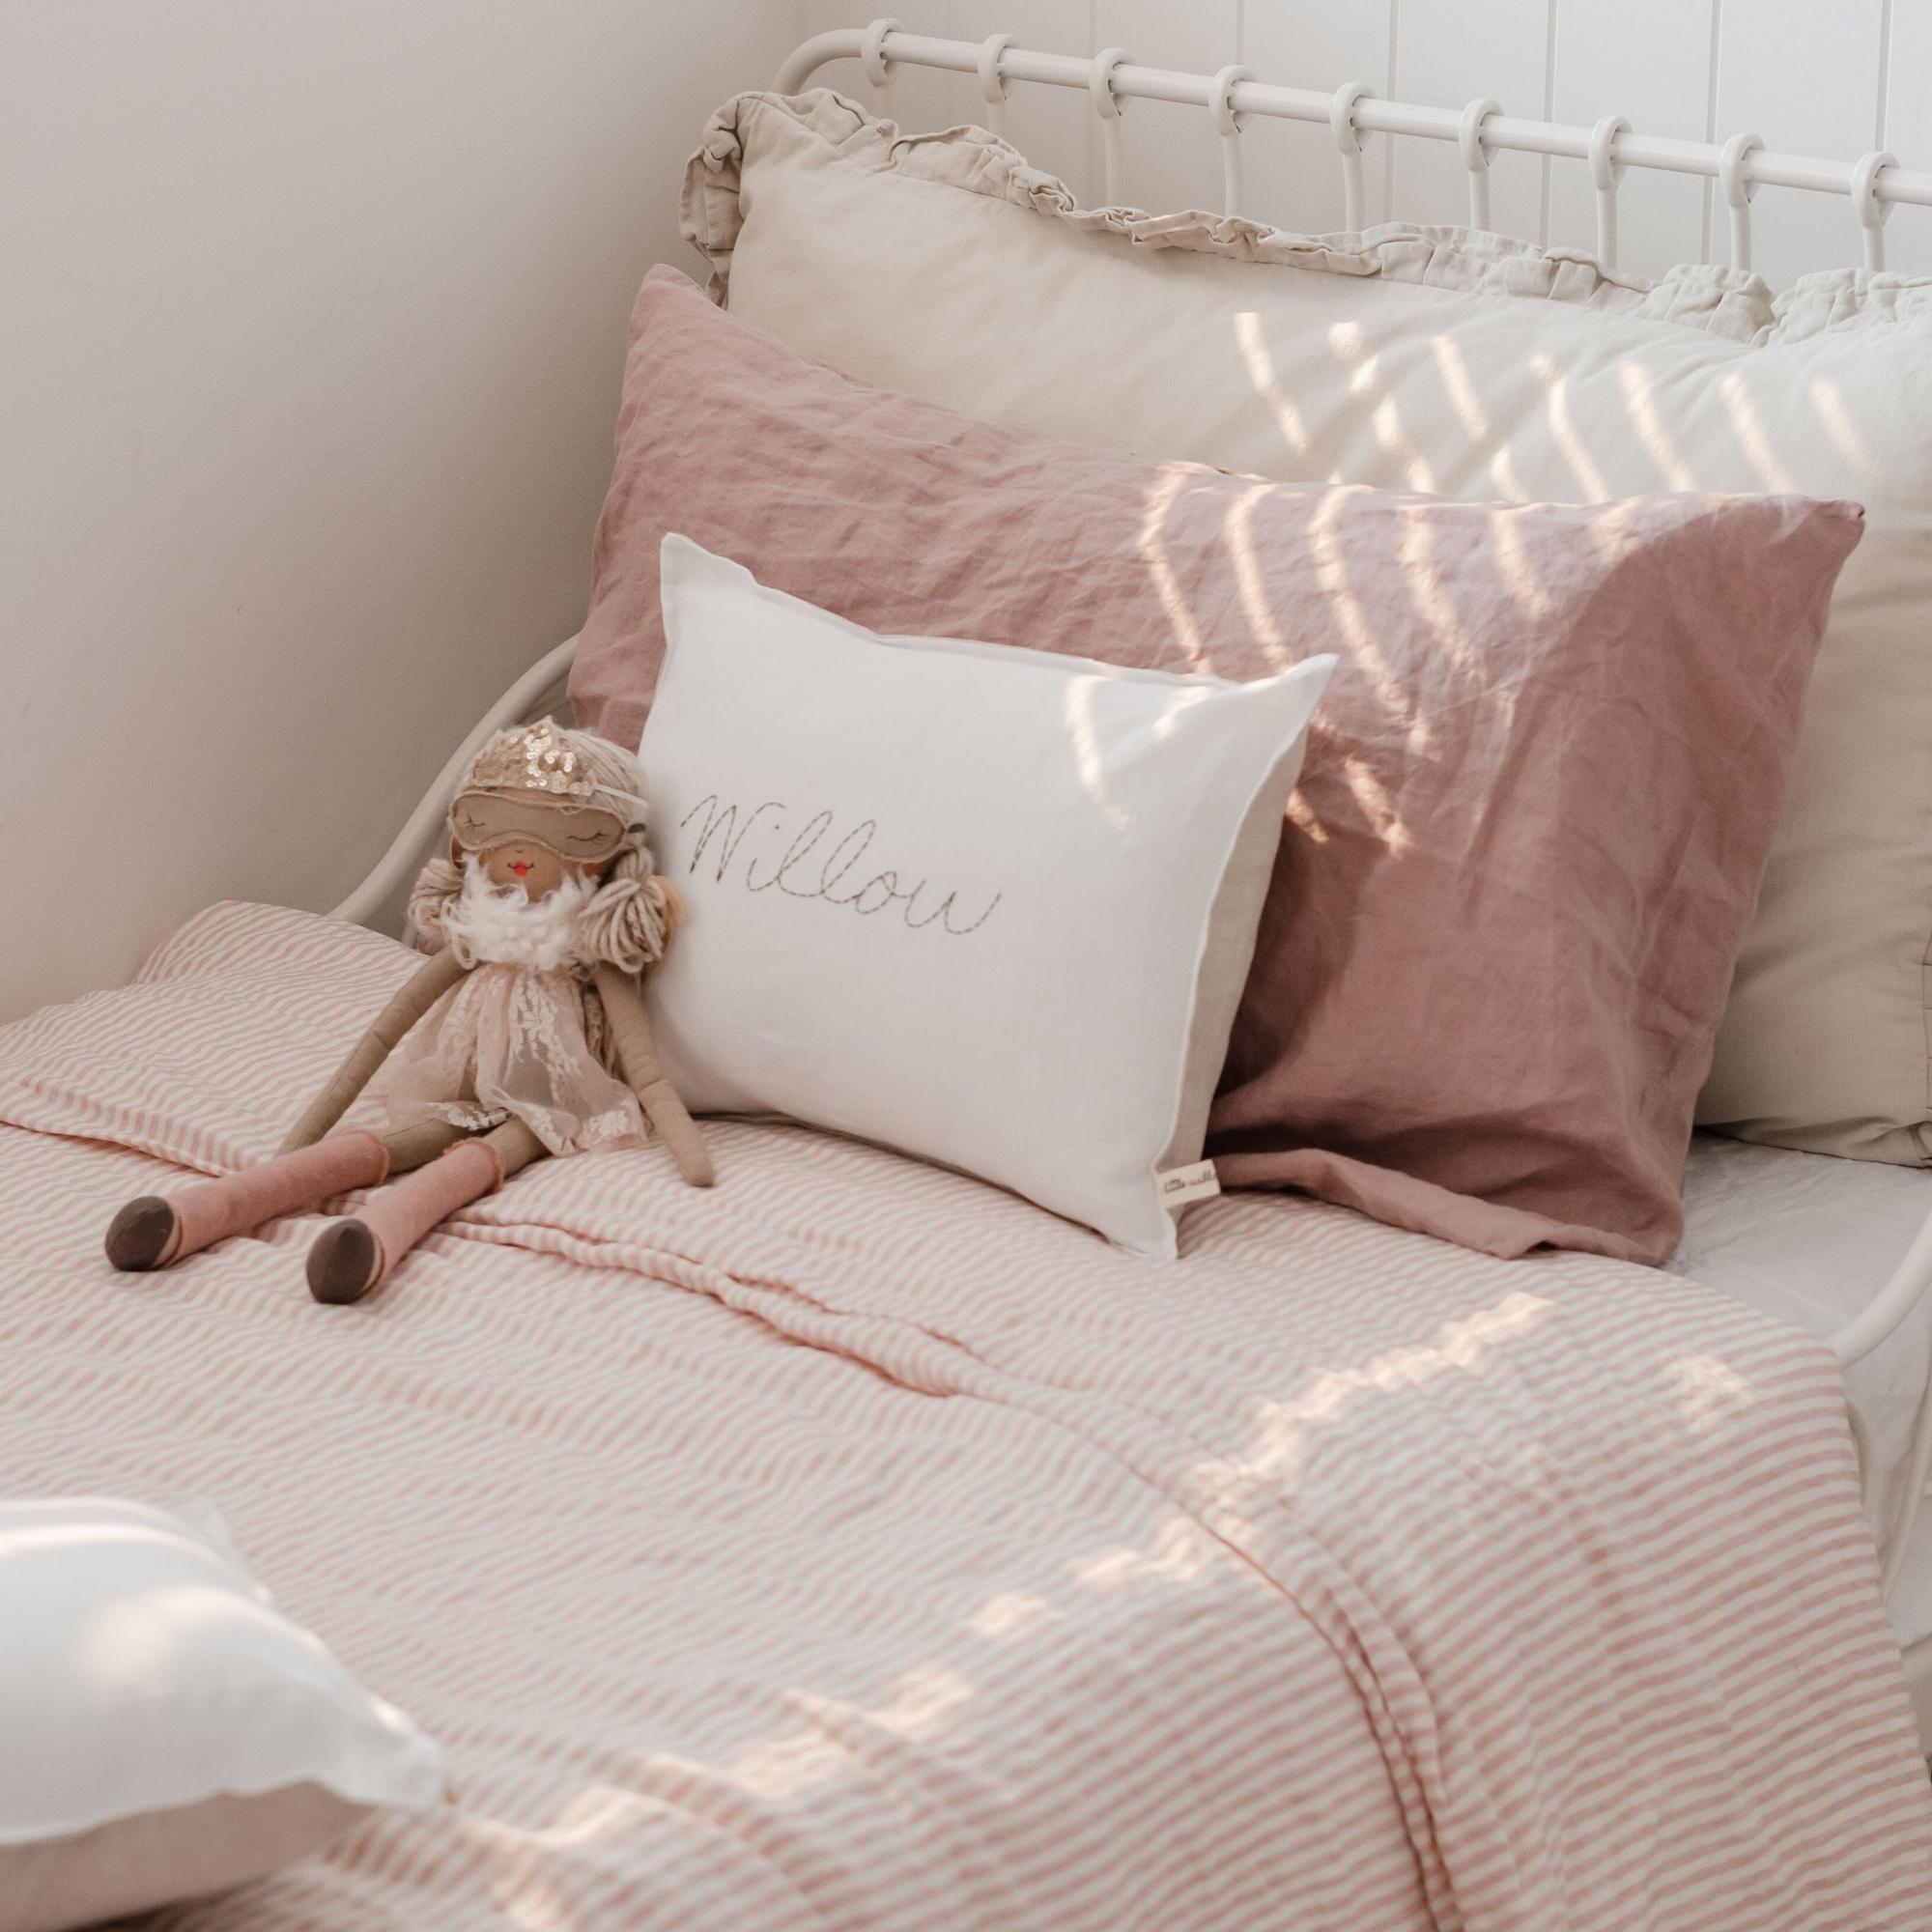 Foxtrot Home bedding - soft pink and stripes